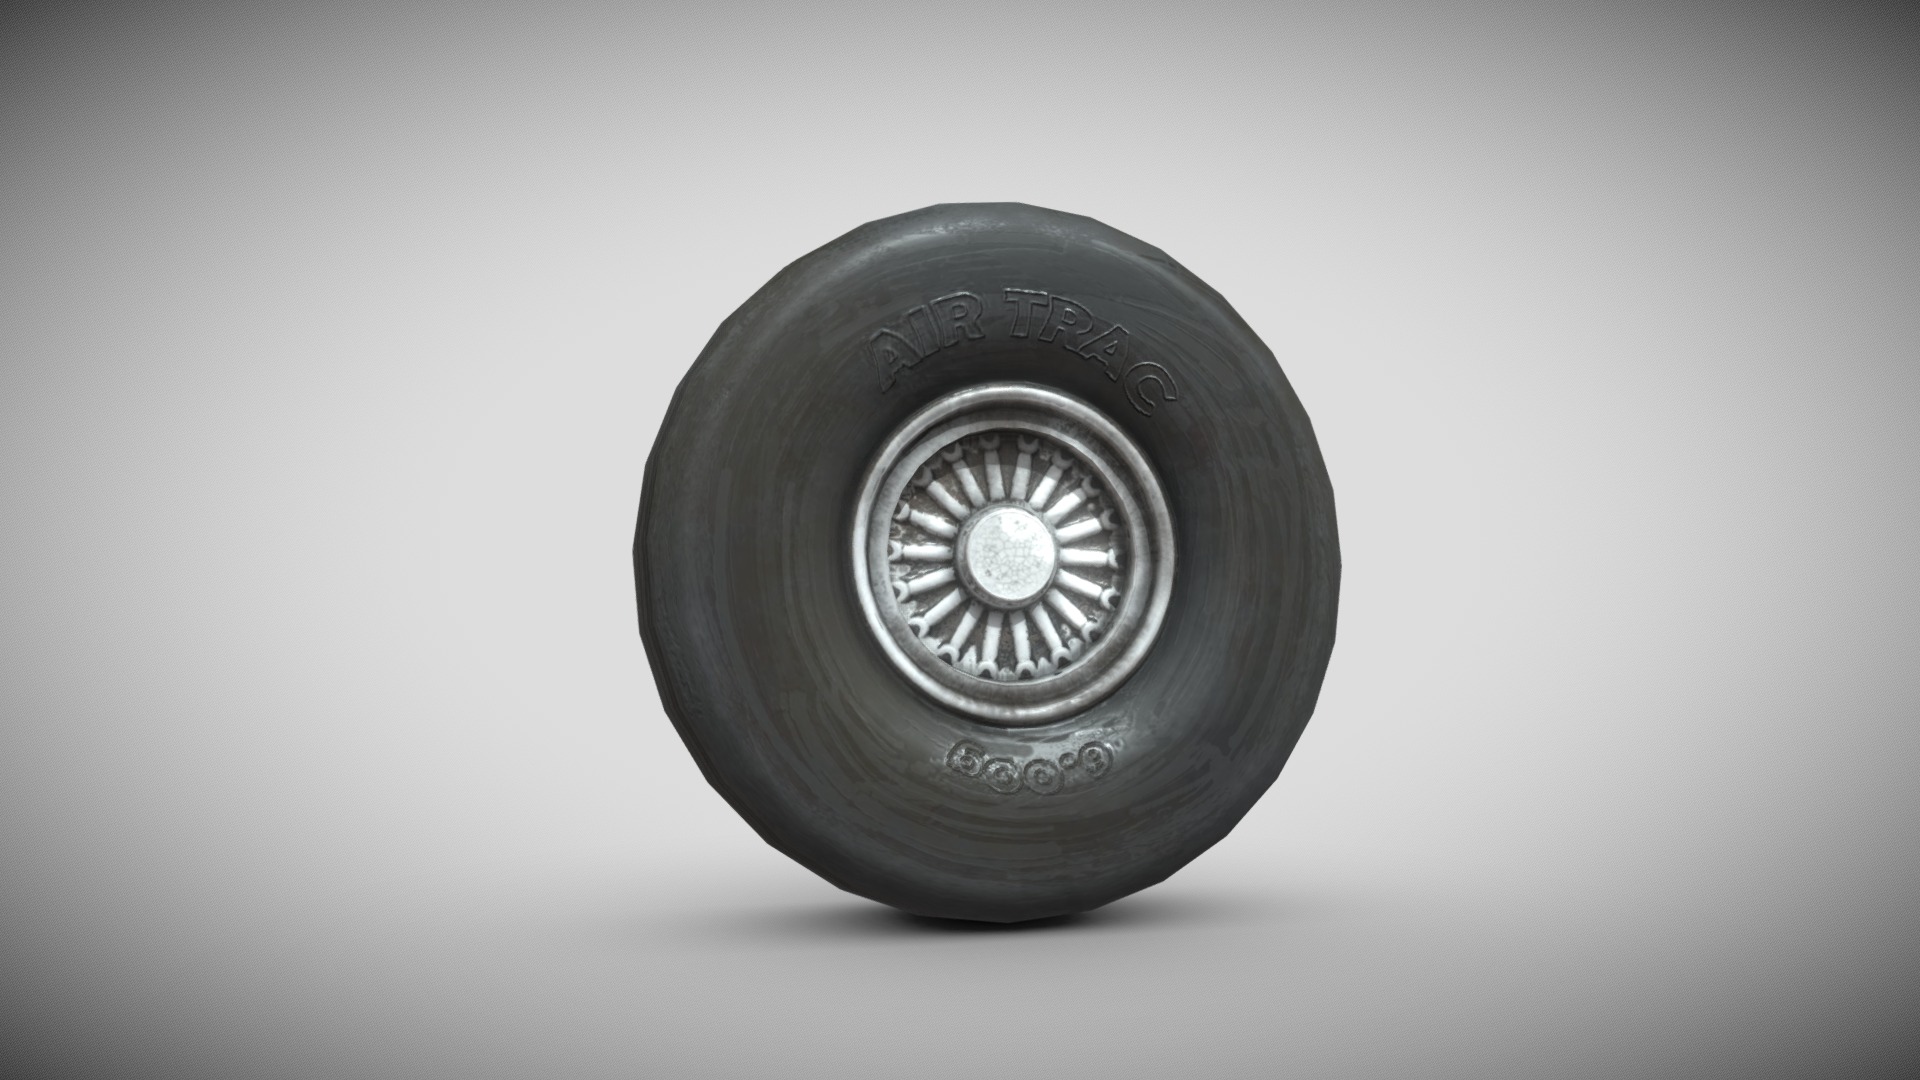 3D model Aircraft tire - This is a 3D model of the Aircraft tire. The 3D model is about a black tire on a white background.